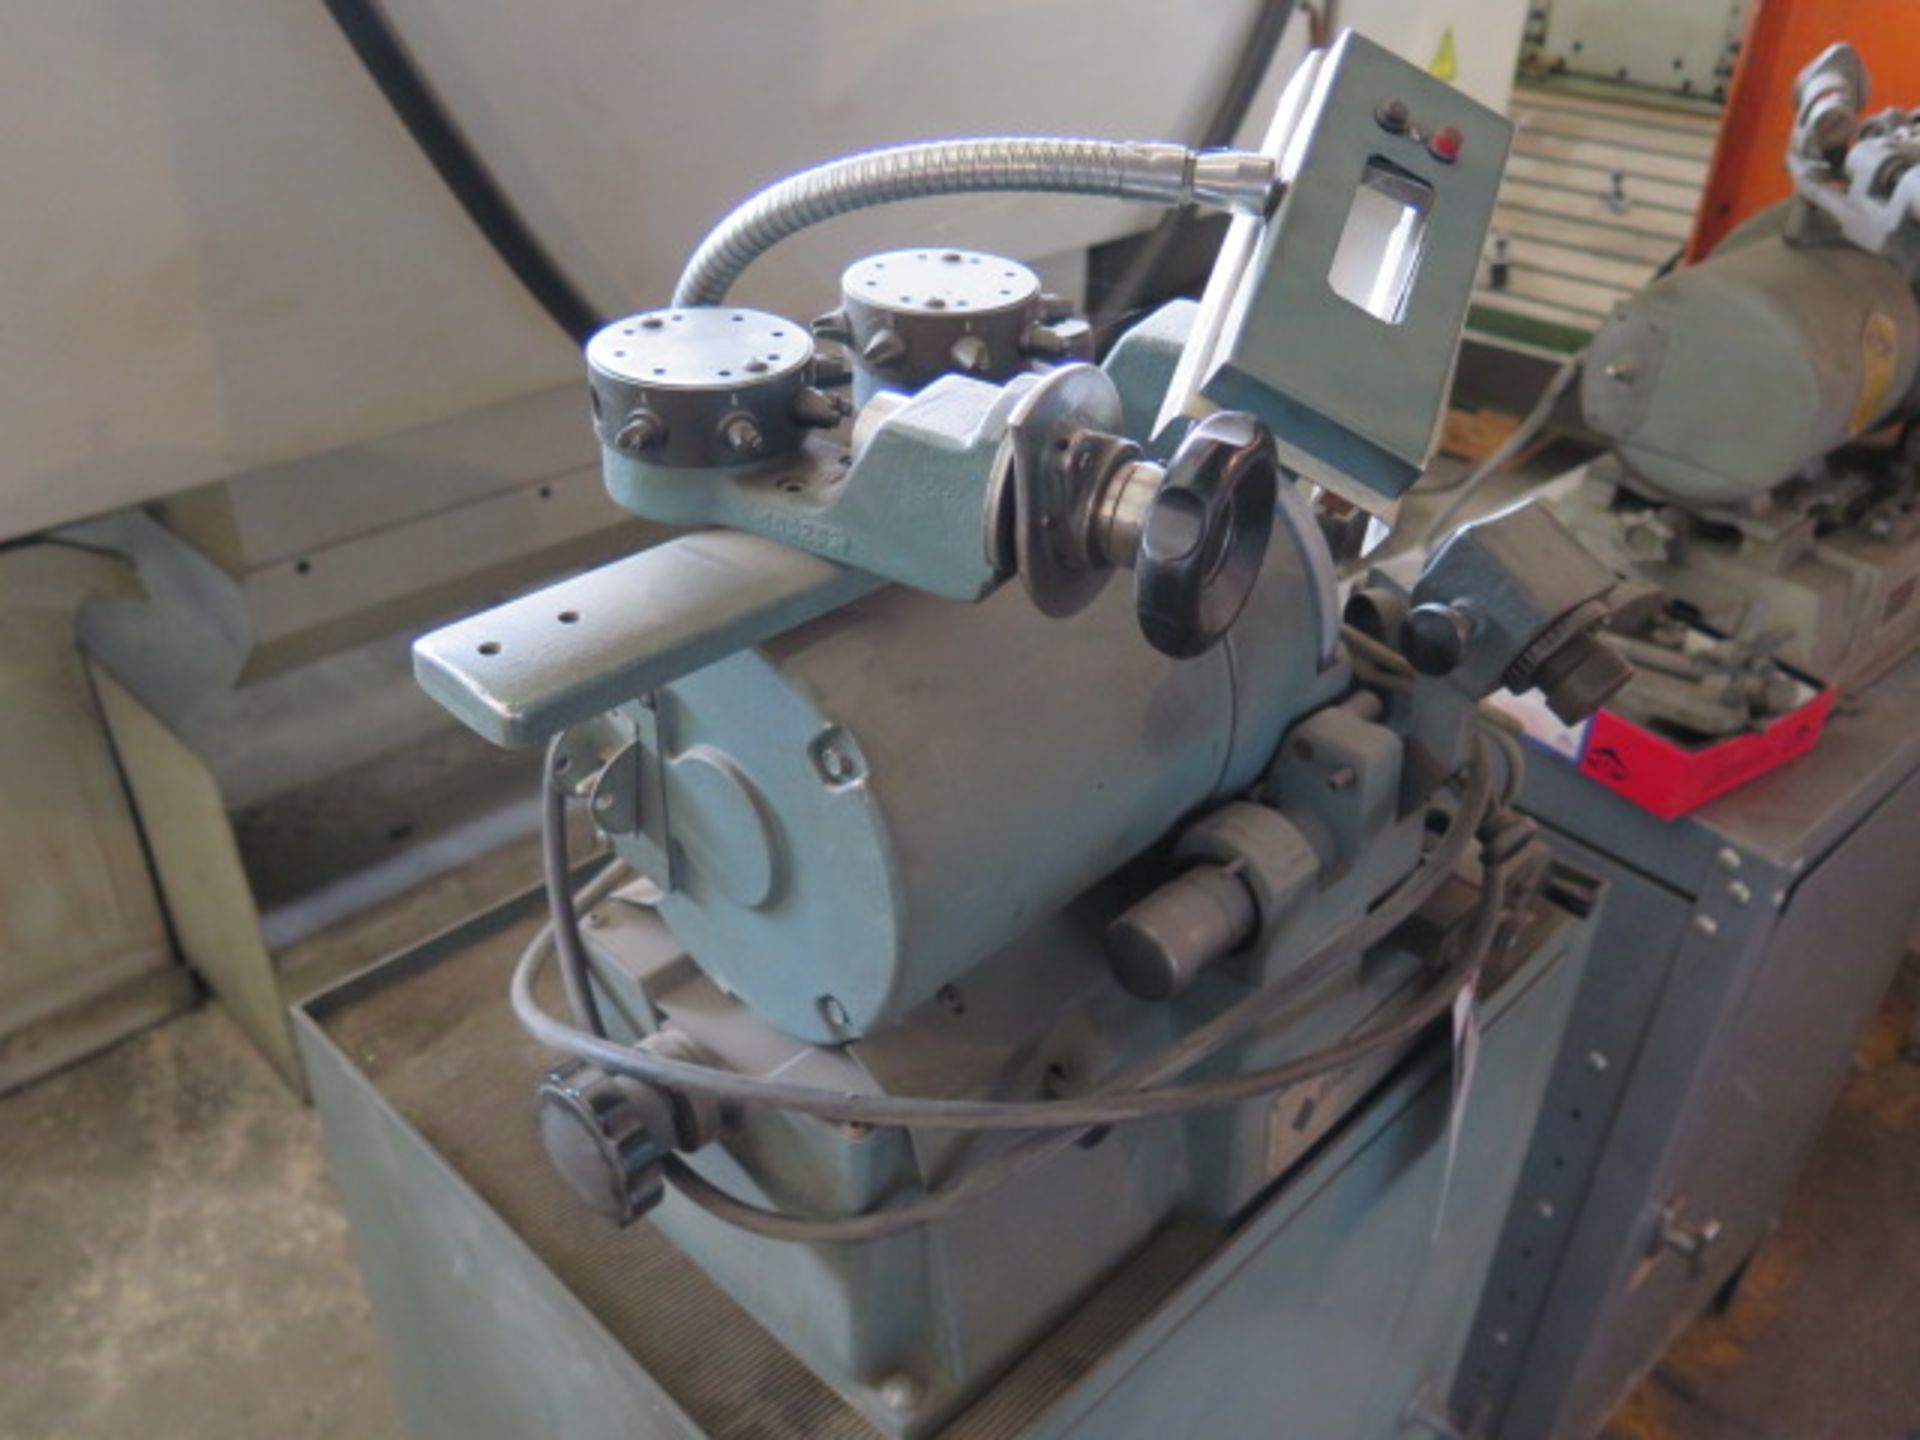 Black & Webster / Black Diamond mdl. 90A Precision Drill Sharpener s/n 28309 w/ Collet SOLD AS IS - Image 3 of 11